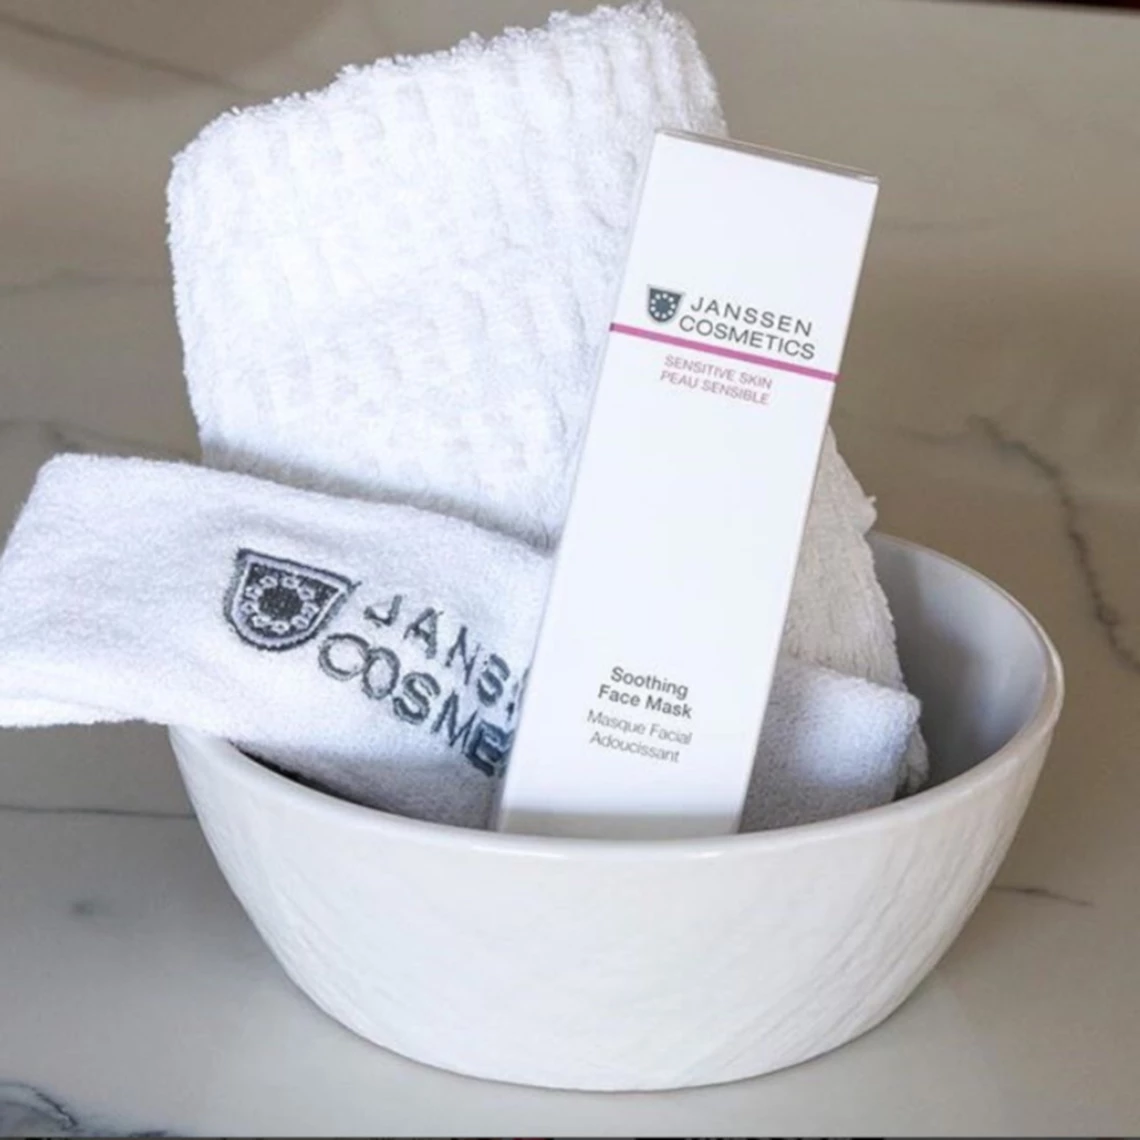 Soothing Face Mask by Janssen Cosmetics 5